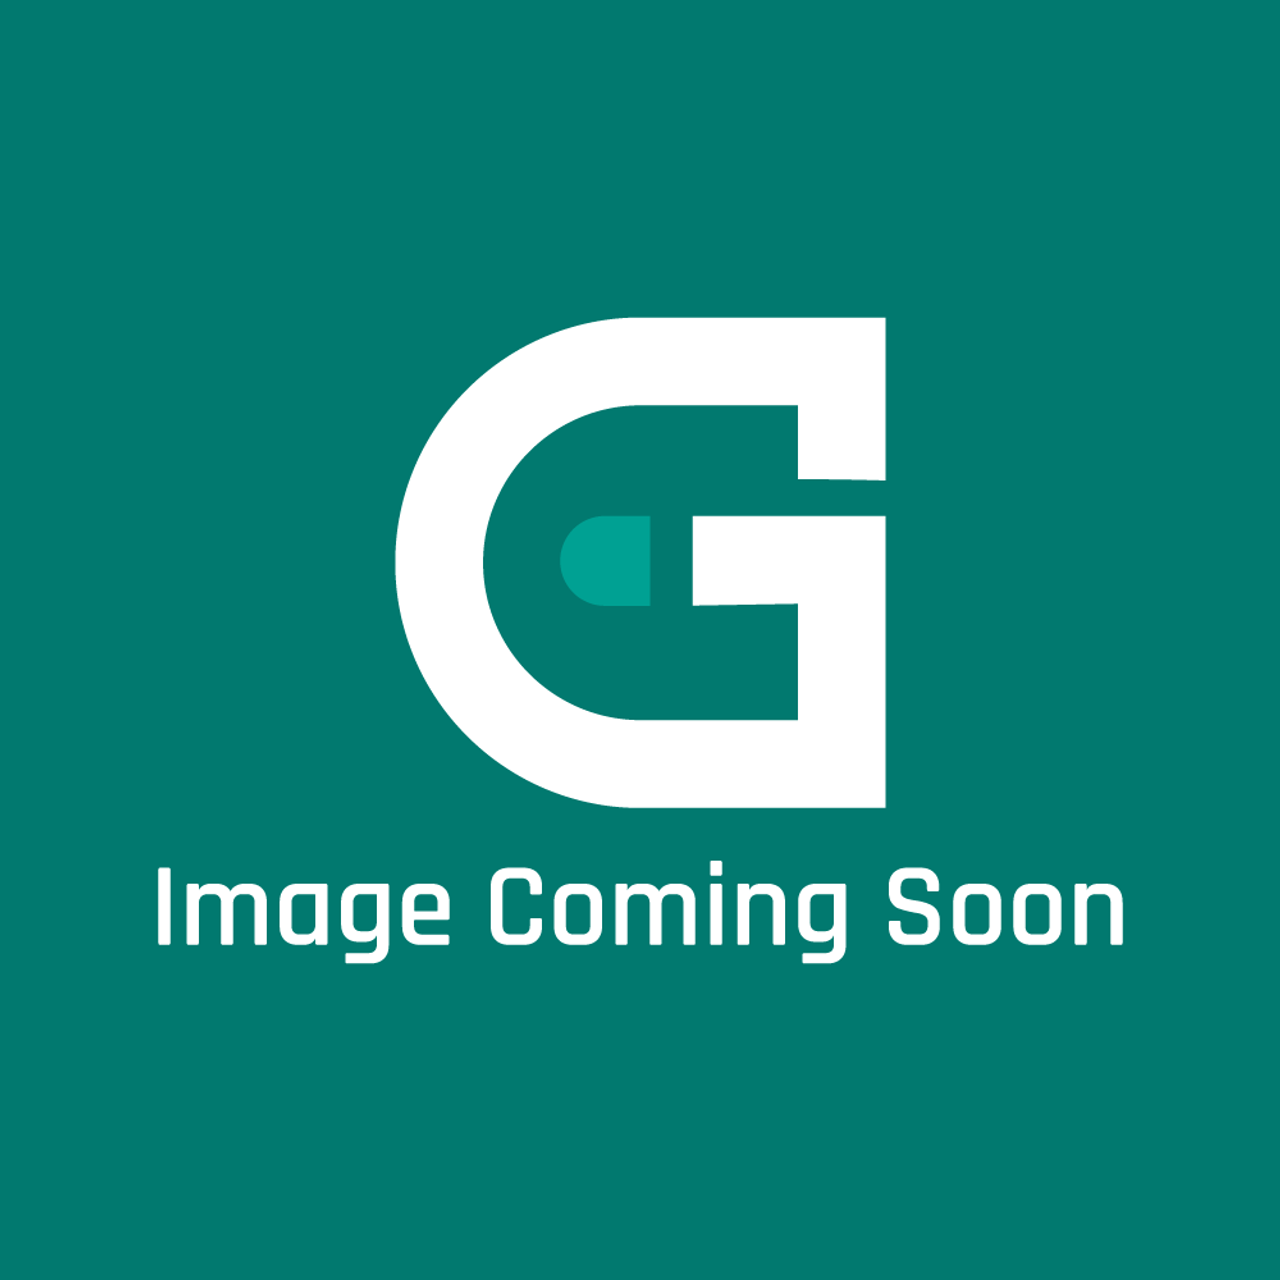 Frigidaire - Electrolux 342817707 Glide - Image Coming Soon!